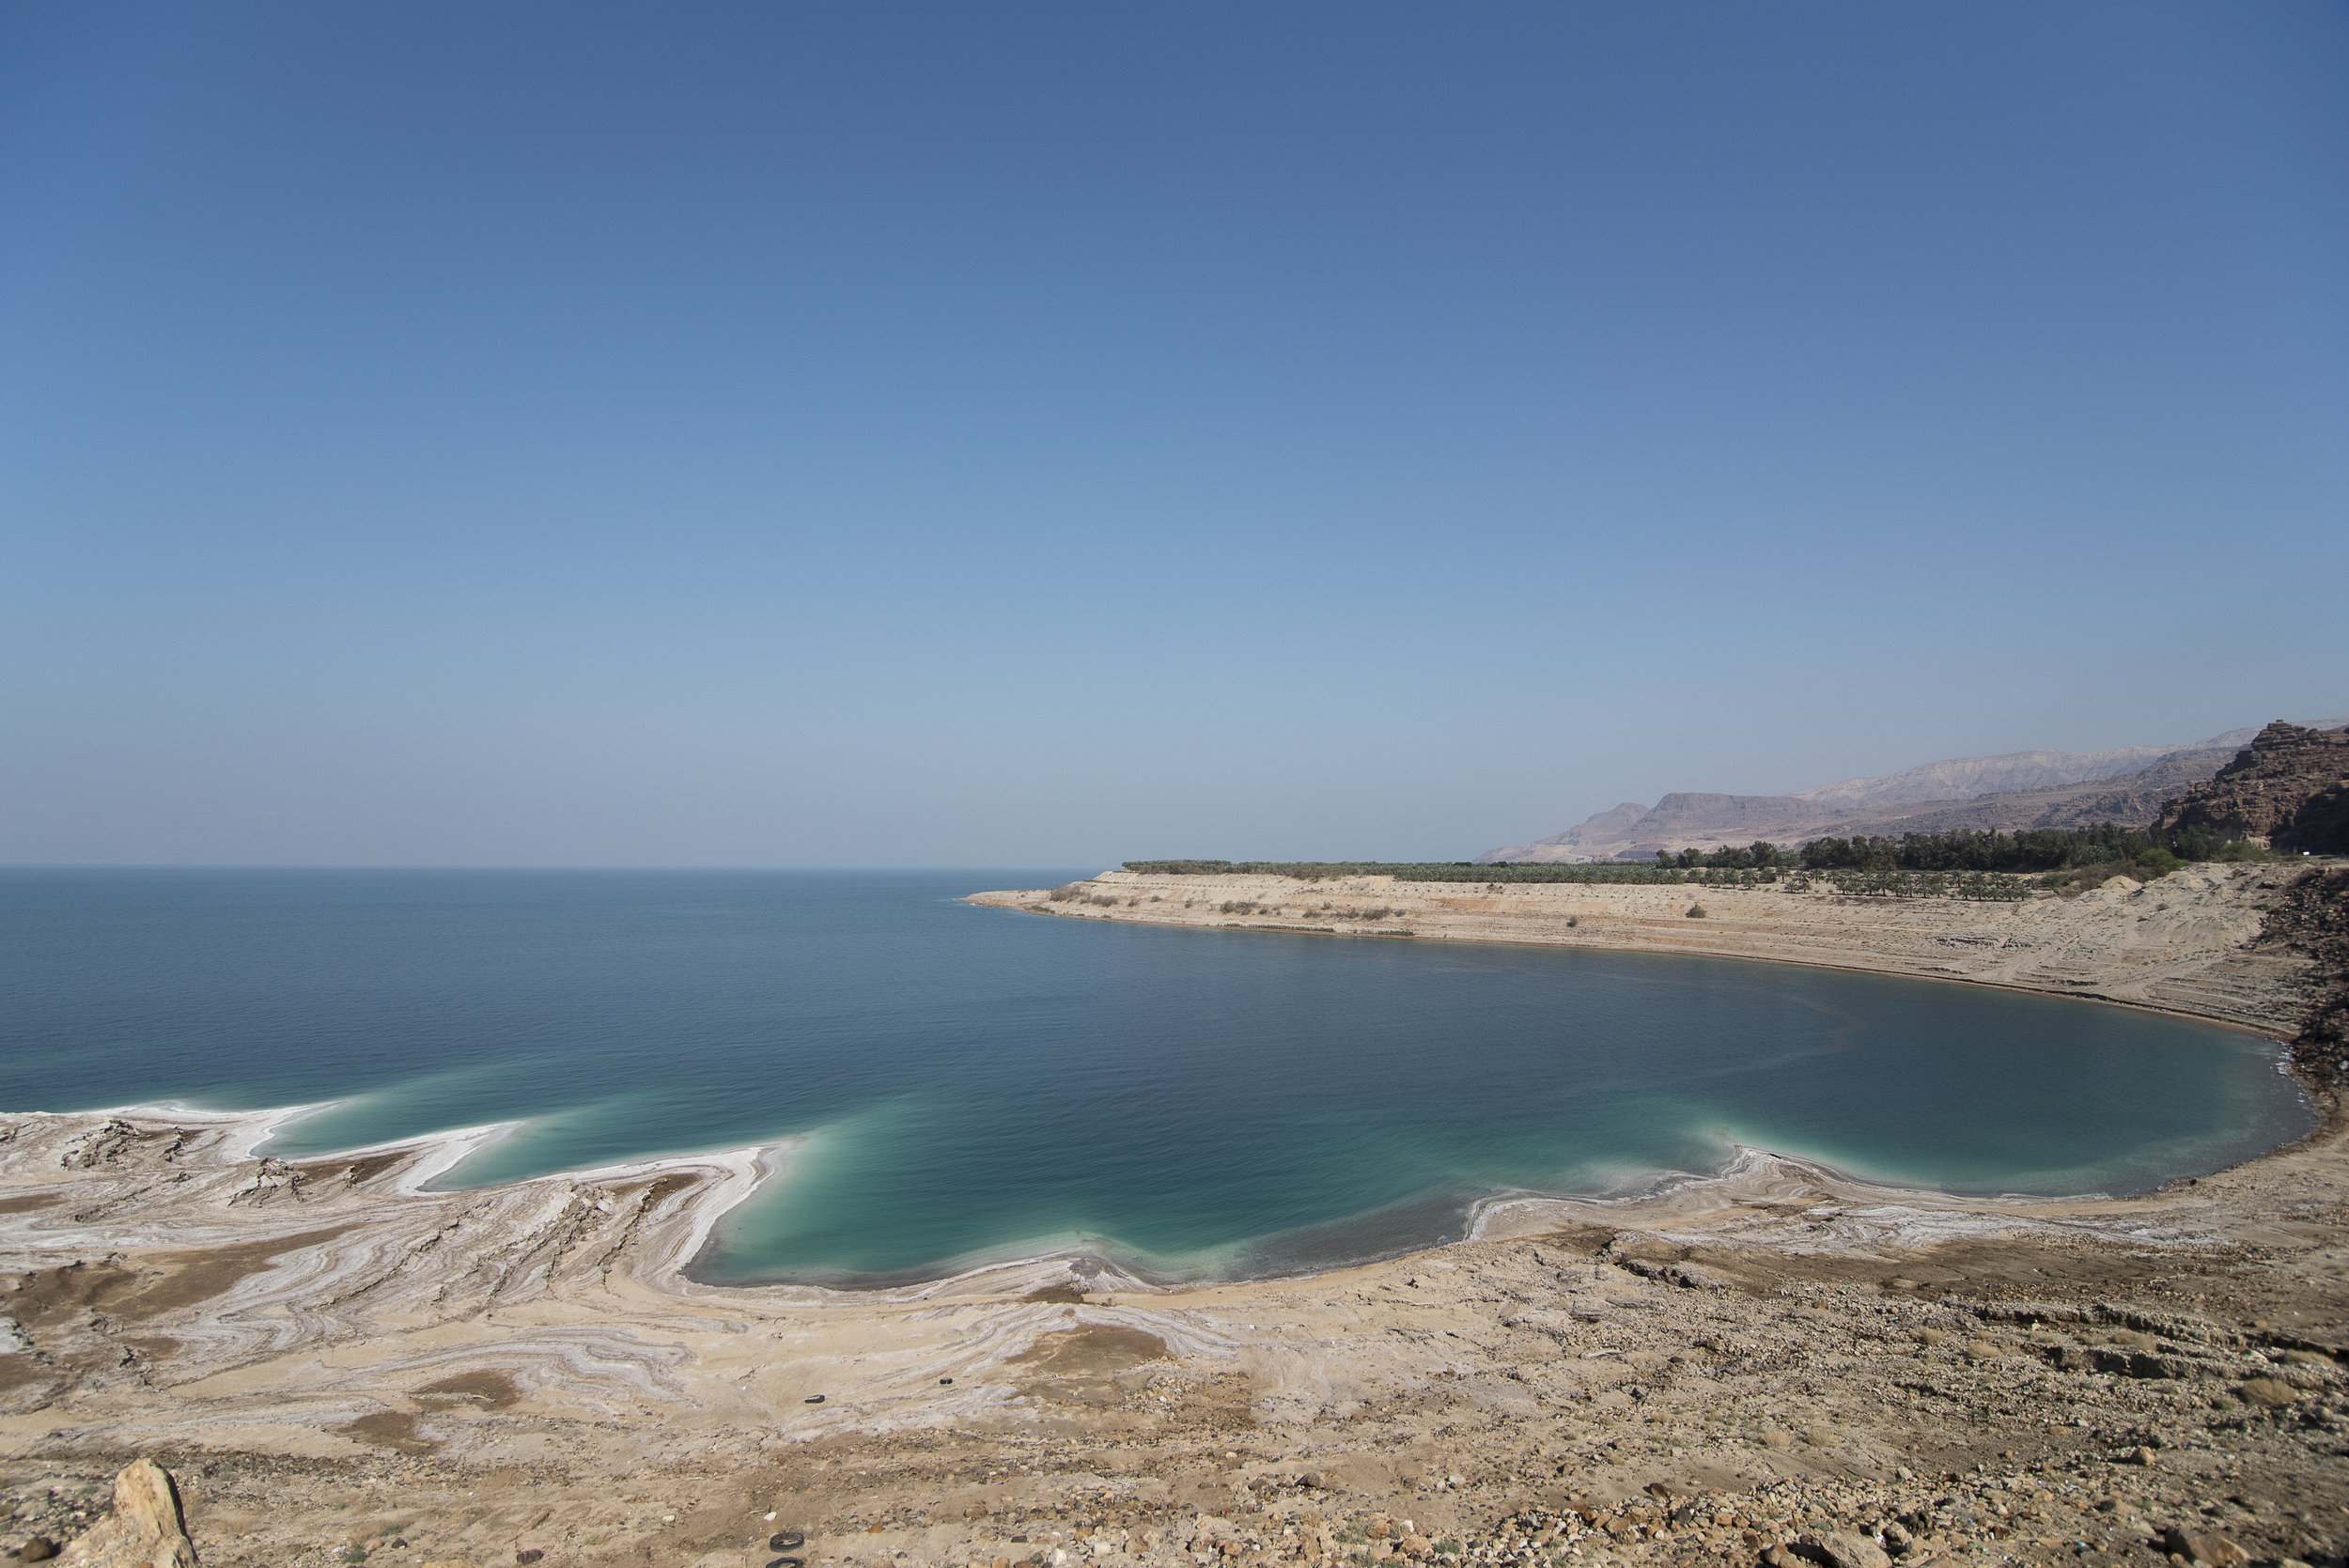 A portion of the Dead Sea near Jordan’s border with Israel shows signs of the shoreline’s vast recession